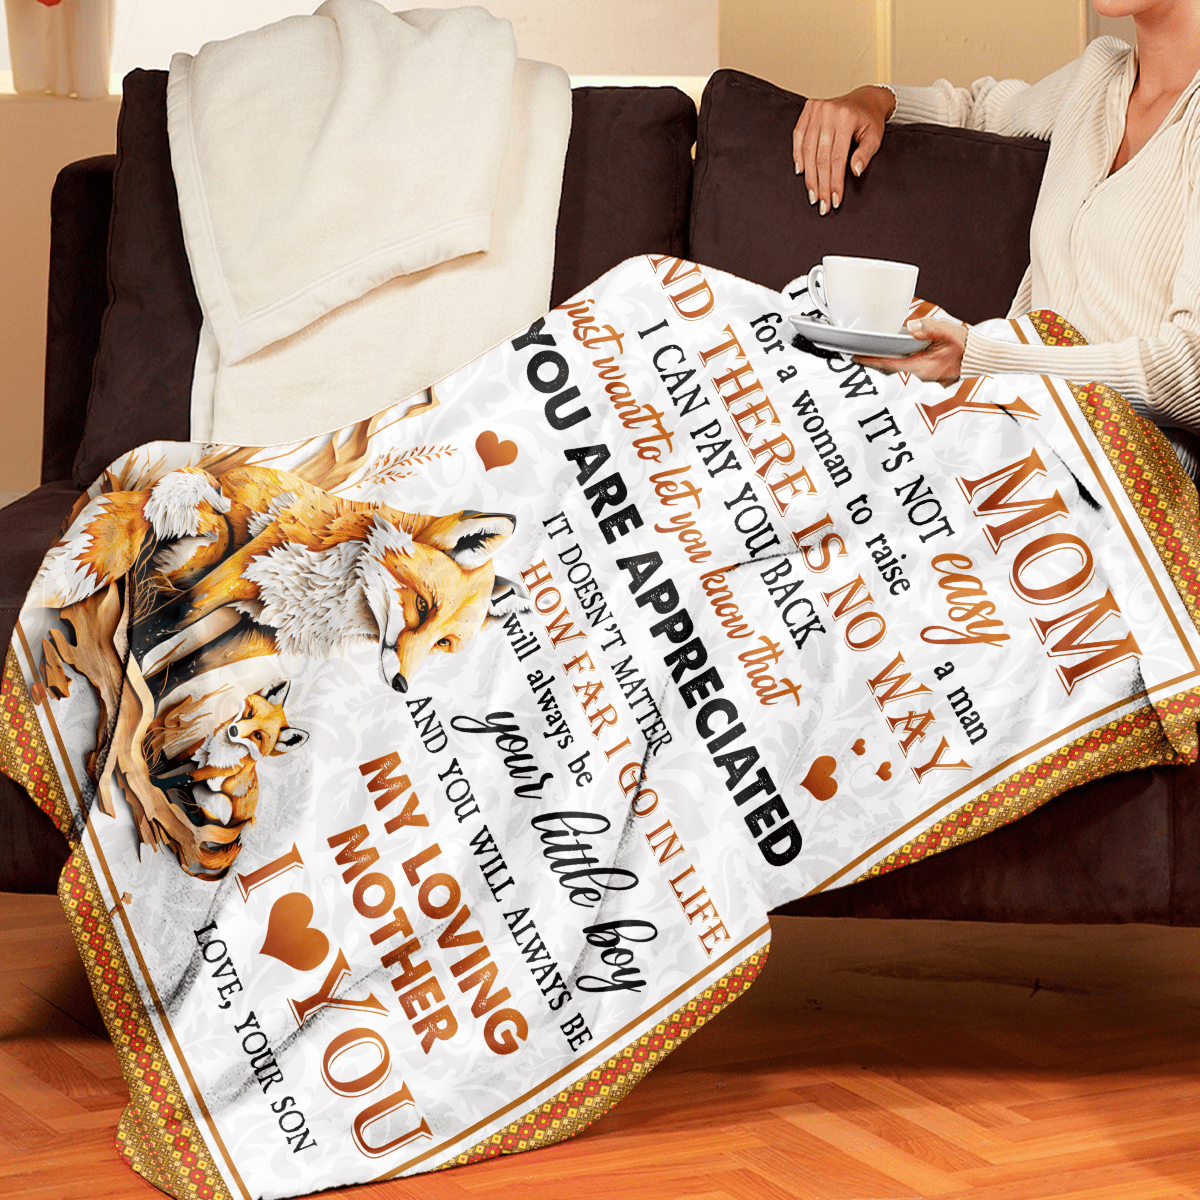 Blanket Gifts With Personalized Blankets Son To Mom Blanket Fox Blanket Mothers Day Gifts Custom Fleece Blankets